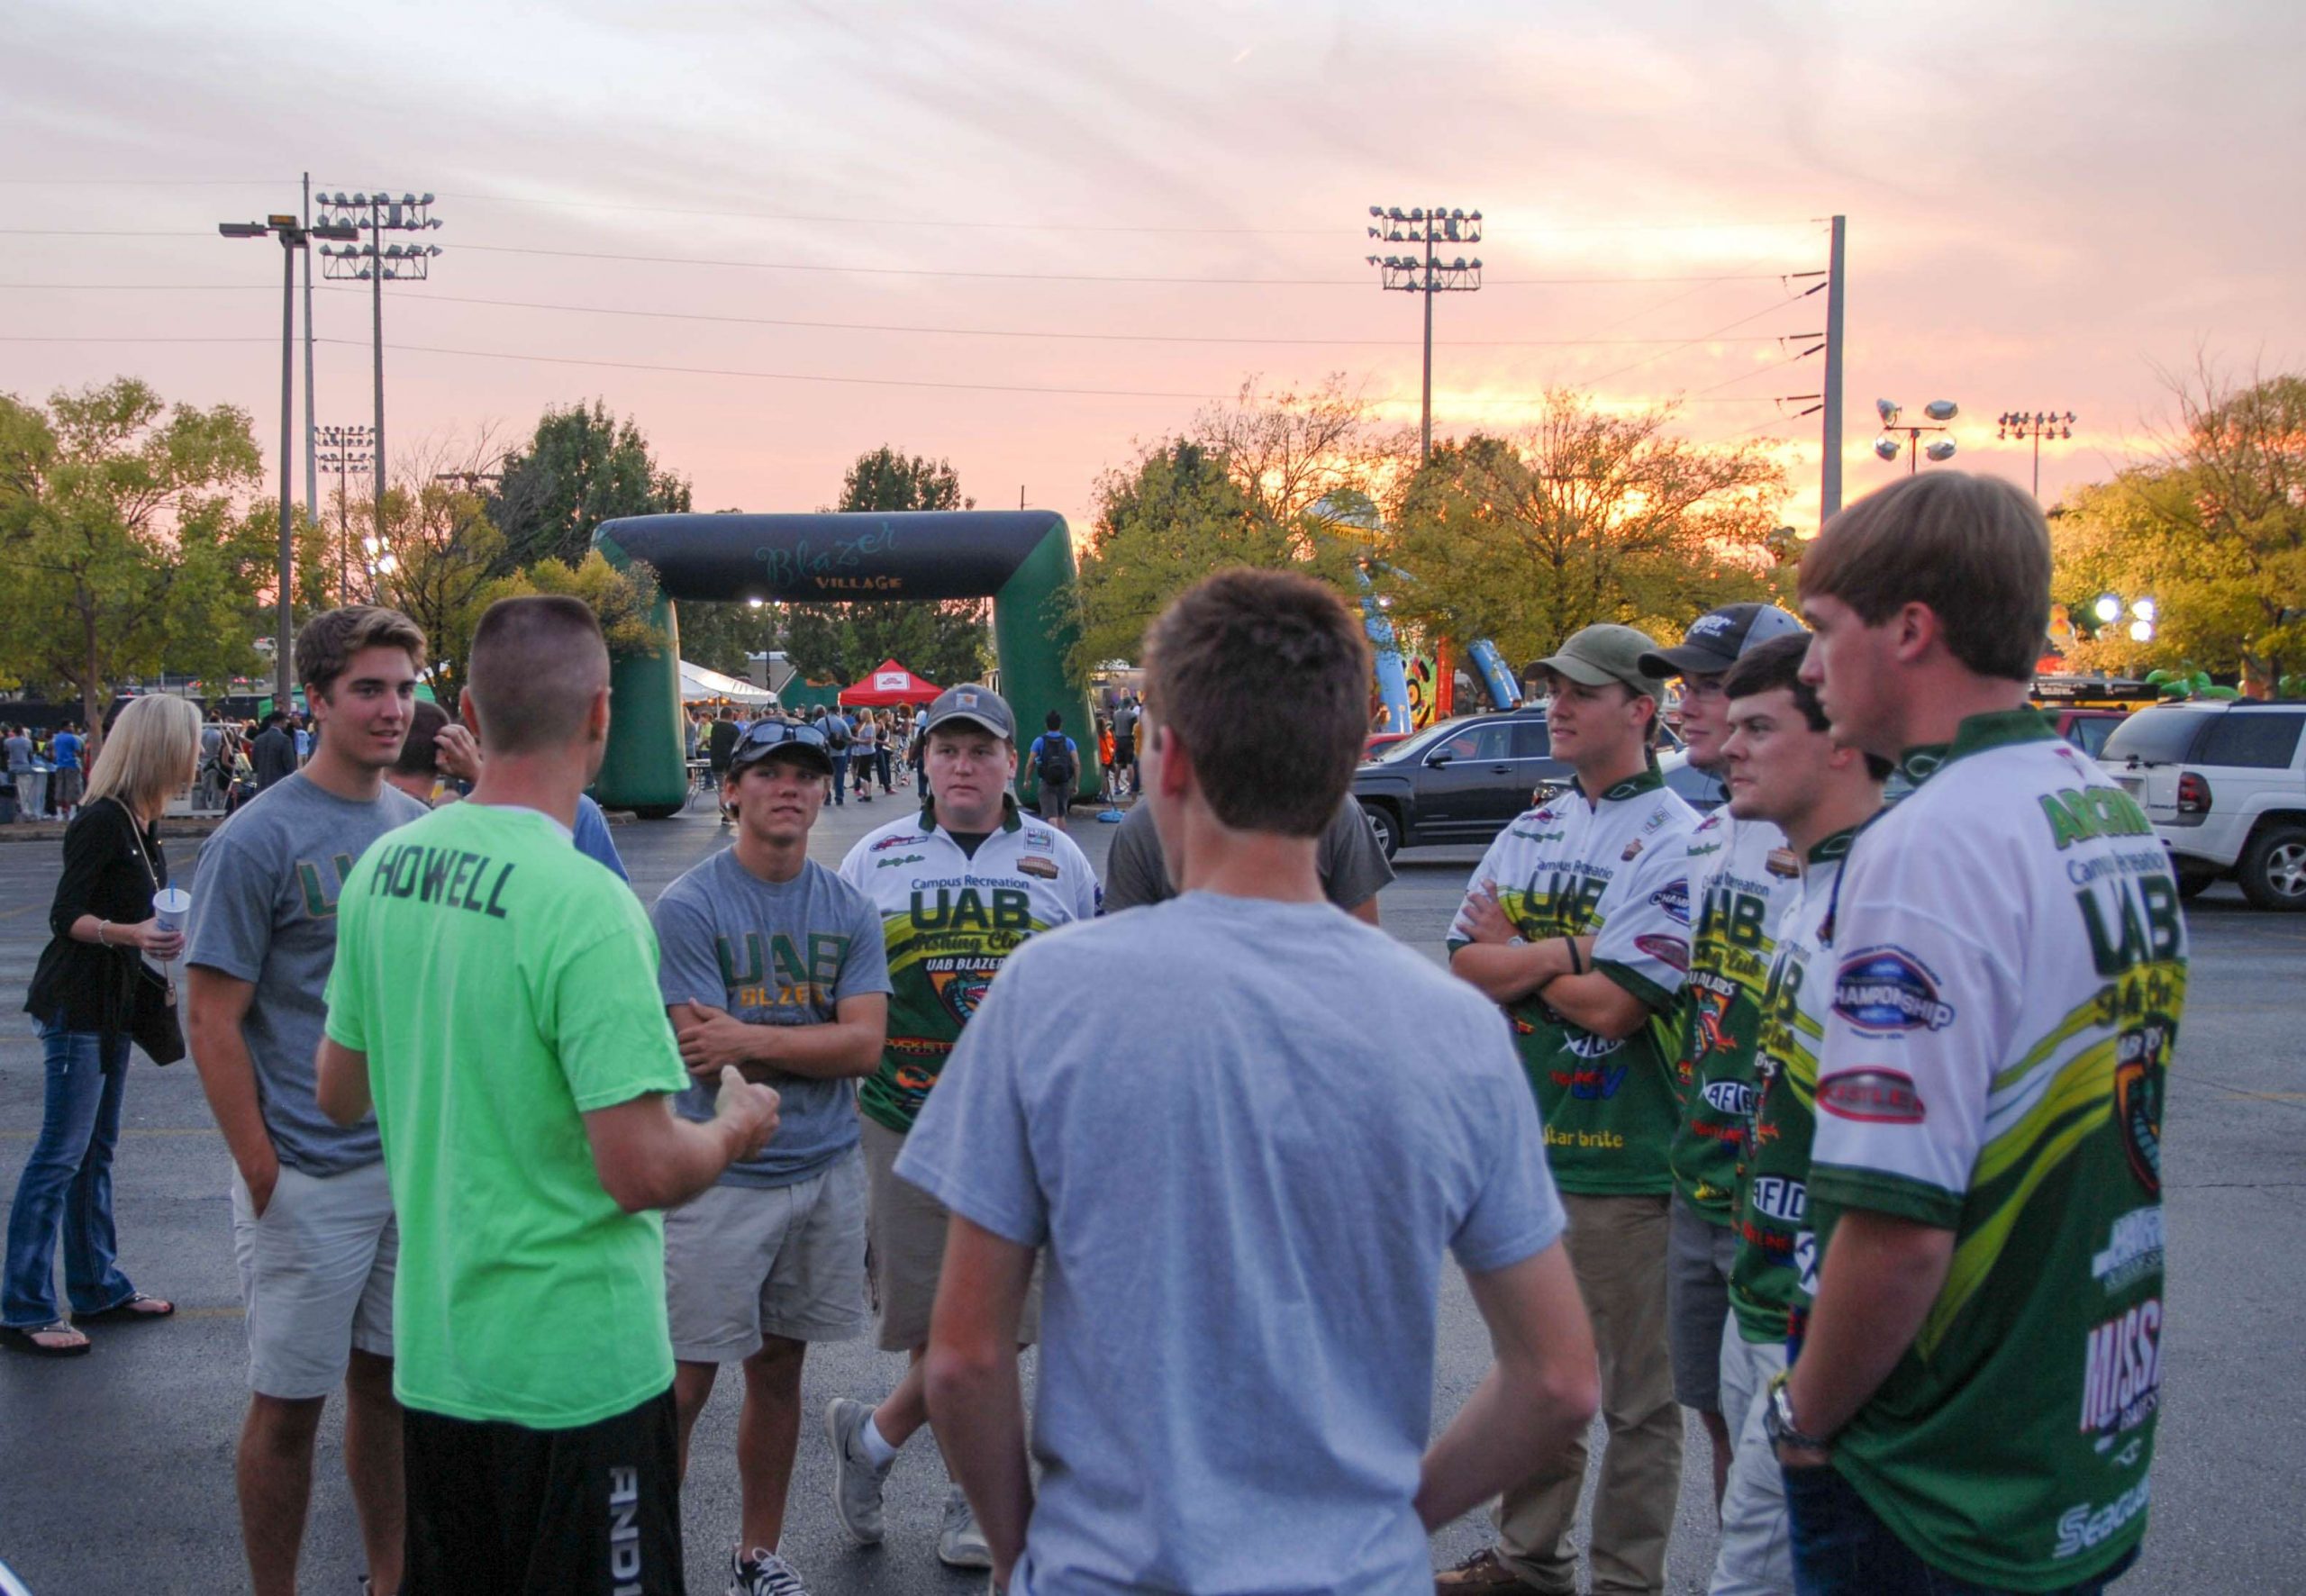 Before he hit the court, Randy talked to the UAB fishing team, which showed up to offer him support. Here's some members of the team...